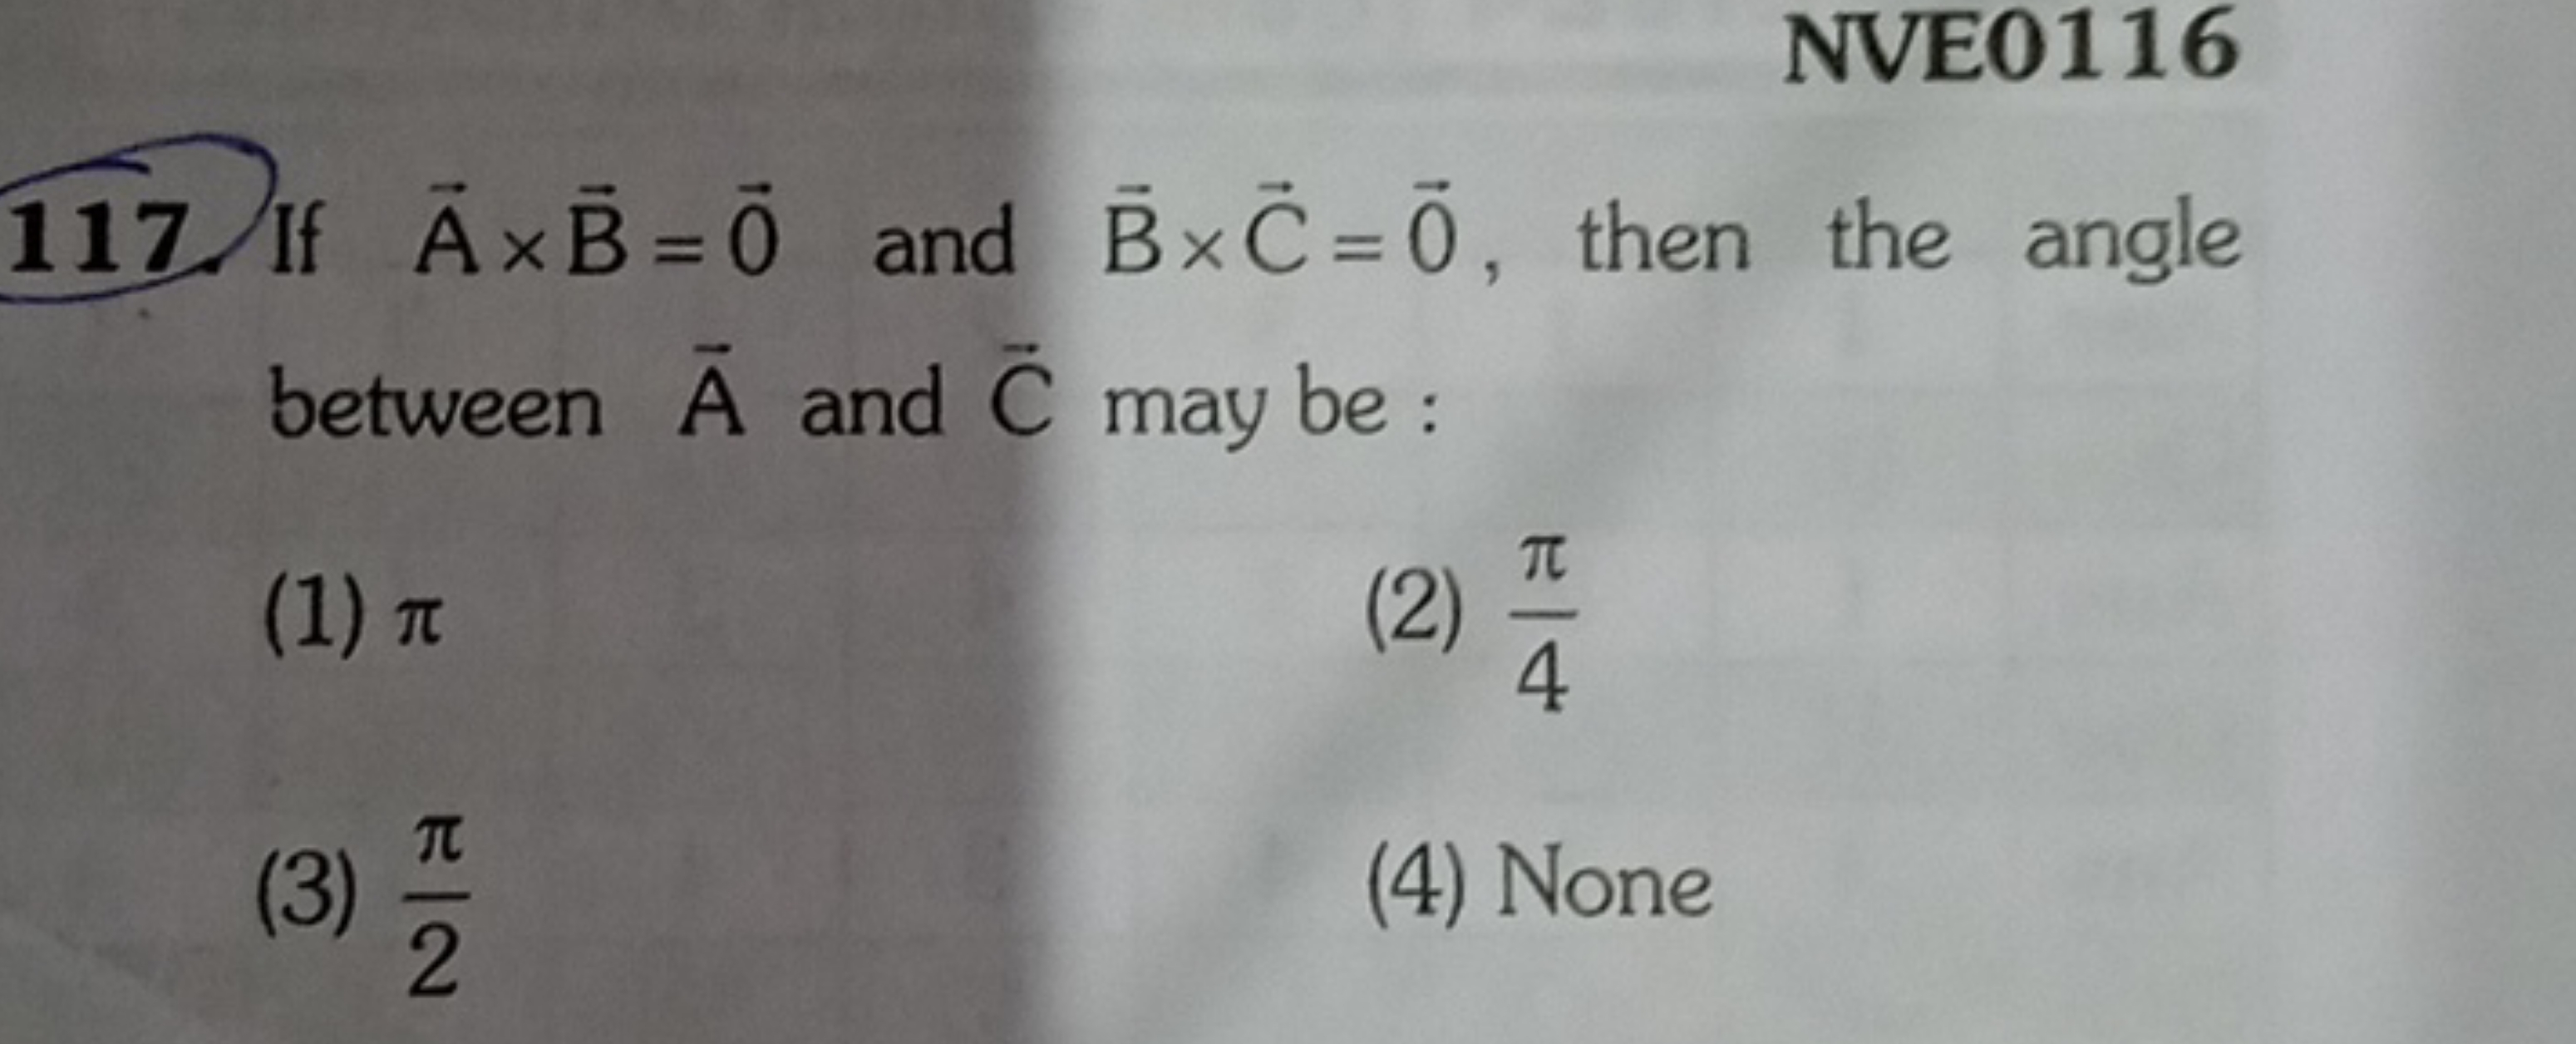 NVE0116 117. If A×B=0 and B×C=0, then the angle between A and C may be